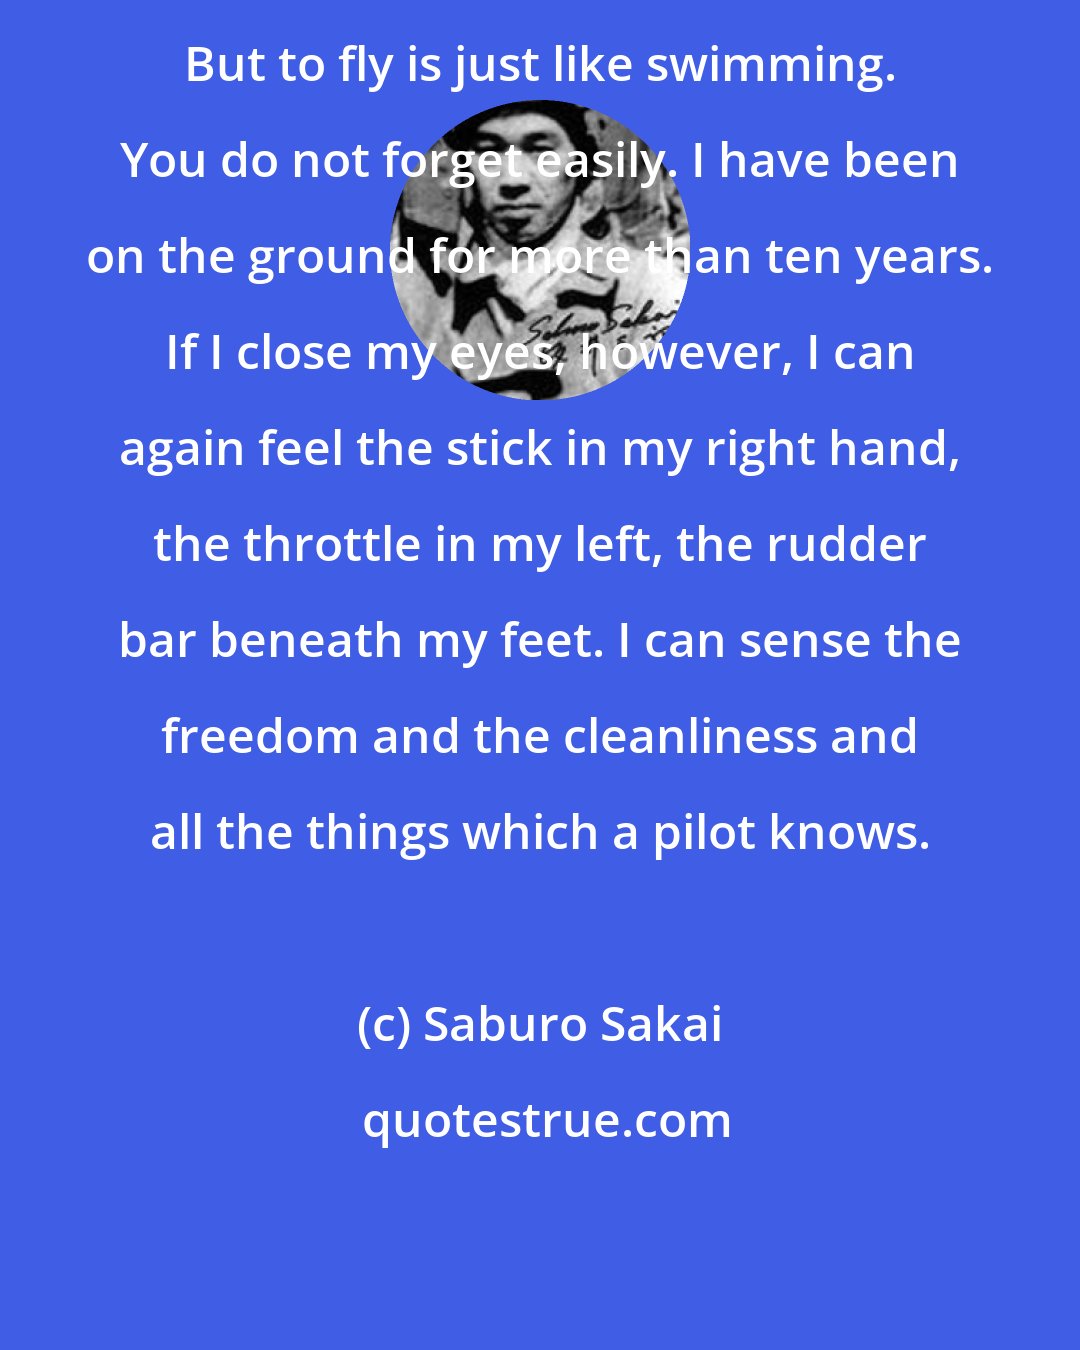 Saburo Sakai: But to fly is just like swimming. You do not forget easily. I have been on the ground for more than ten years. If I close my eyes, however, I can again feel the stick in my right hand, the throttle in my left, the rudder bar beneath my feet. I can sense the freedom and the cleanliness and all the things which a pilot knows.